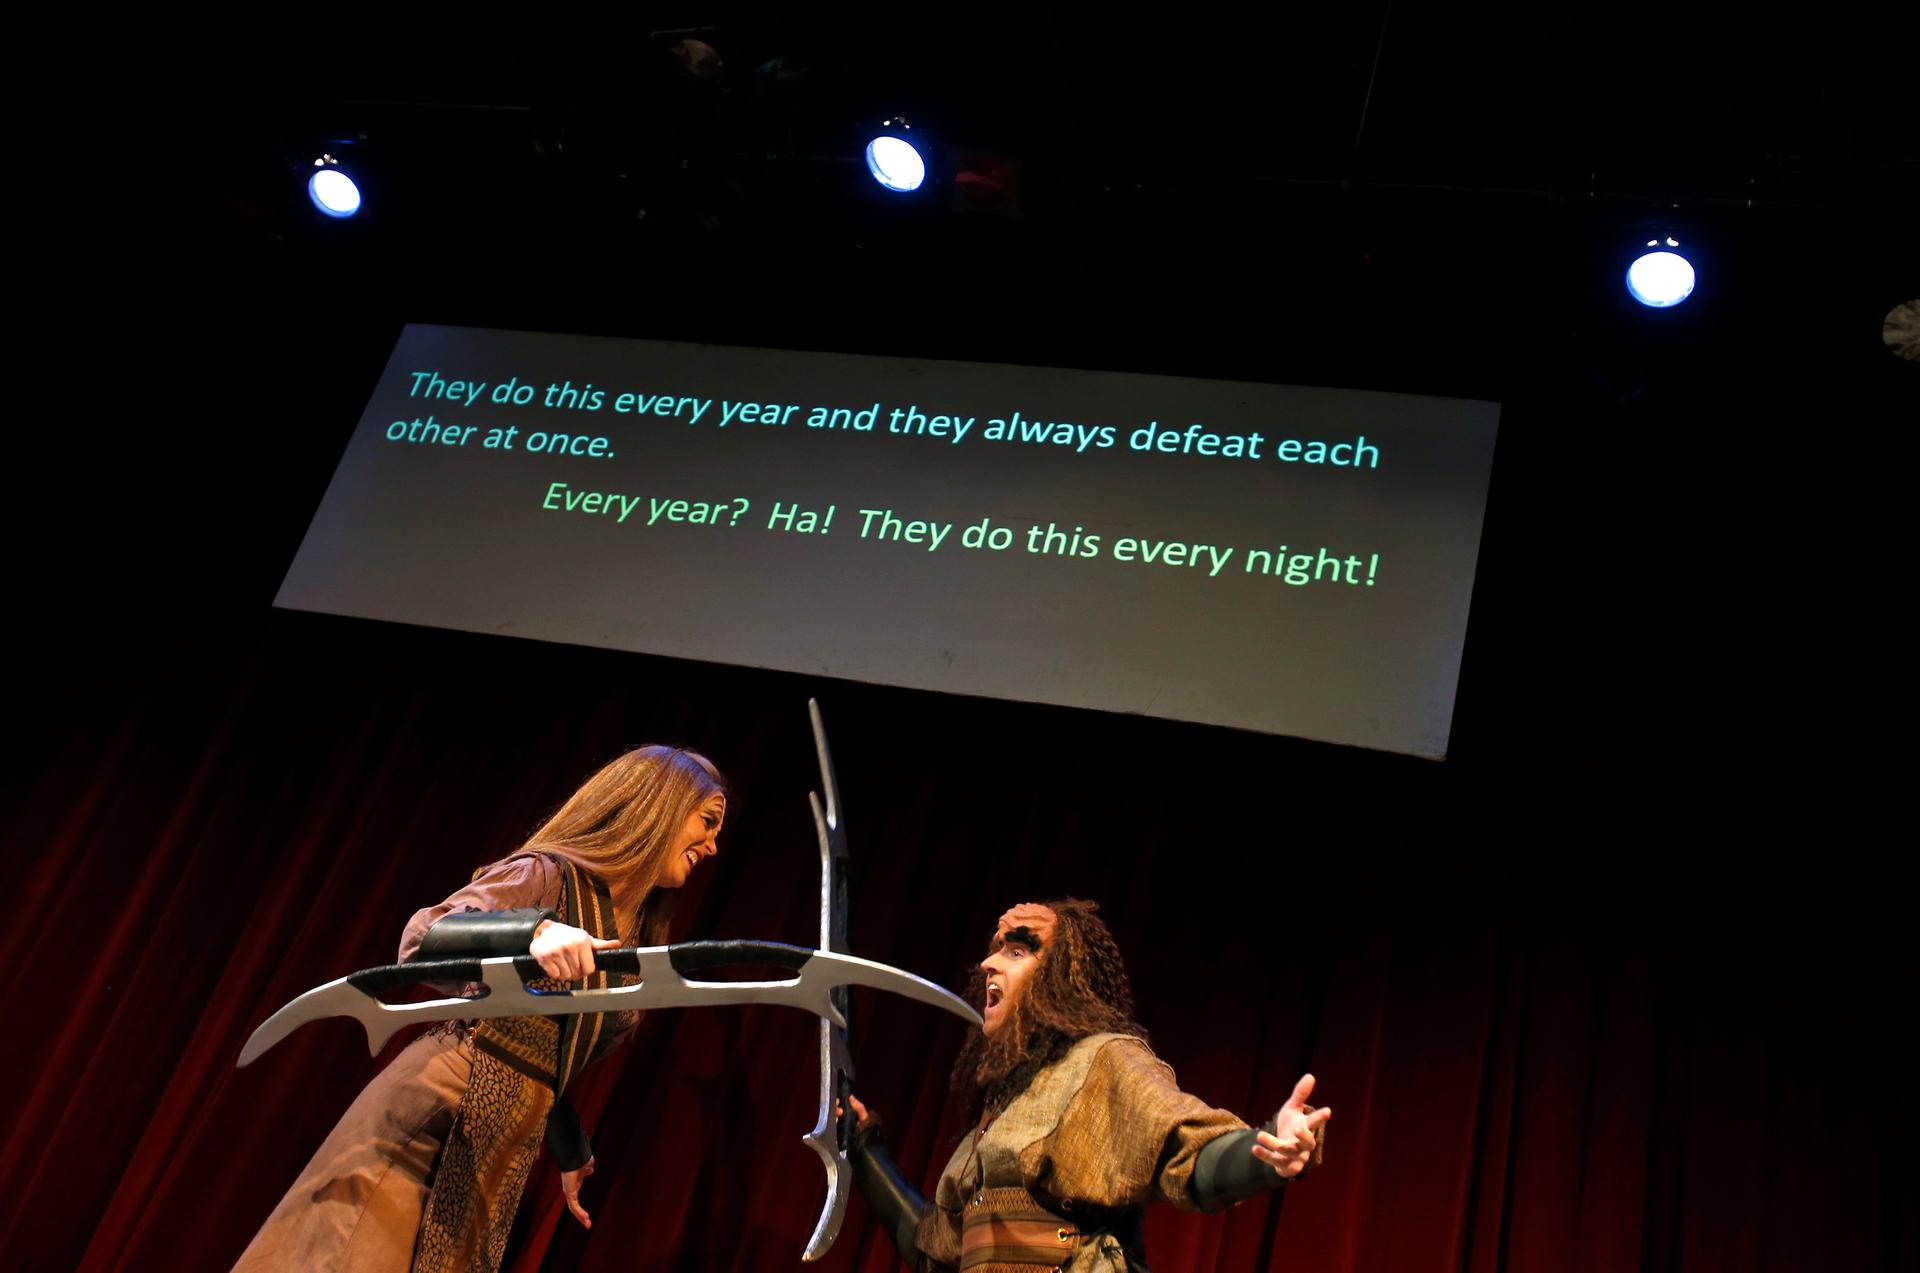 Performers Ali Kidder-Mostrom (L) and David Coupe perform a fight scene as a translation of their dialogue is projected on a screen during a performance of "A Klingon Christmas Carol" in Chicago, December 20, 2012